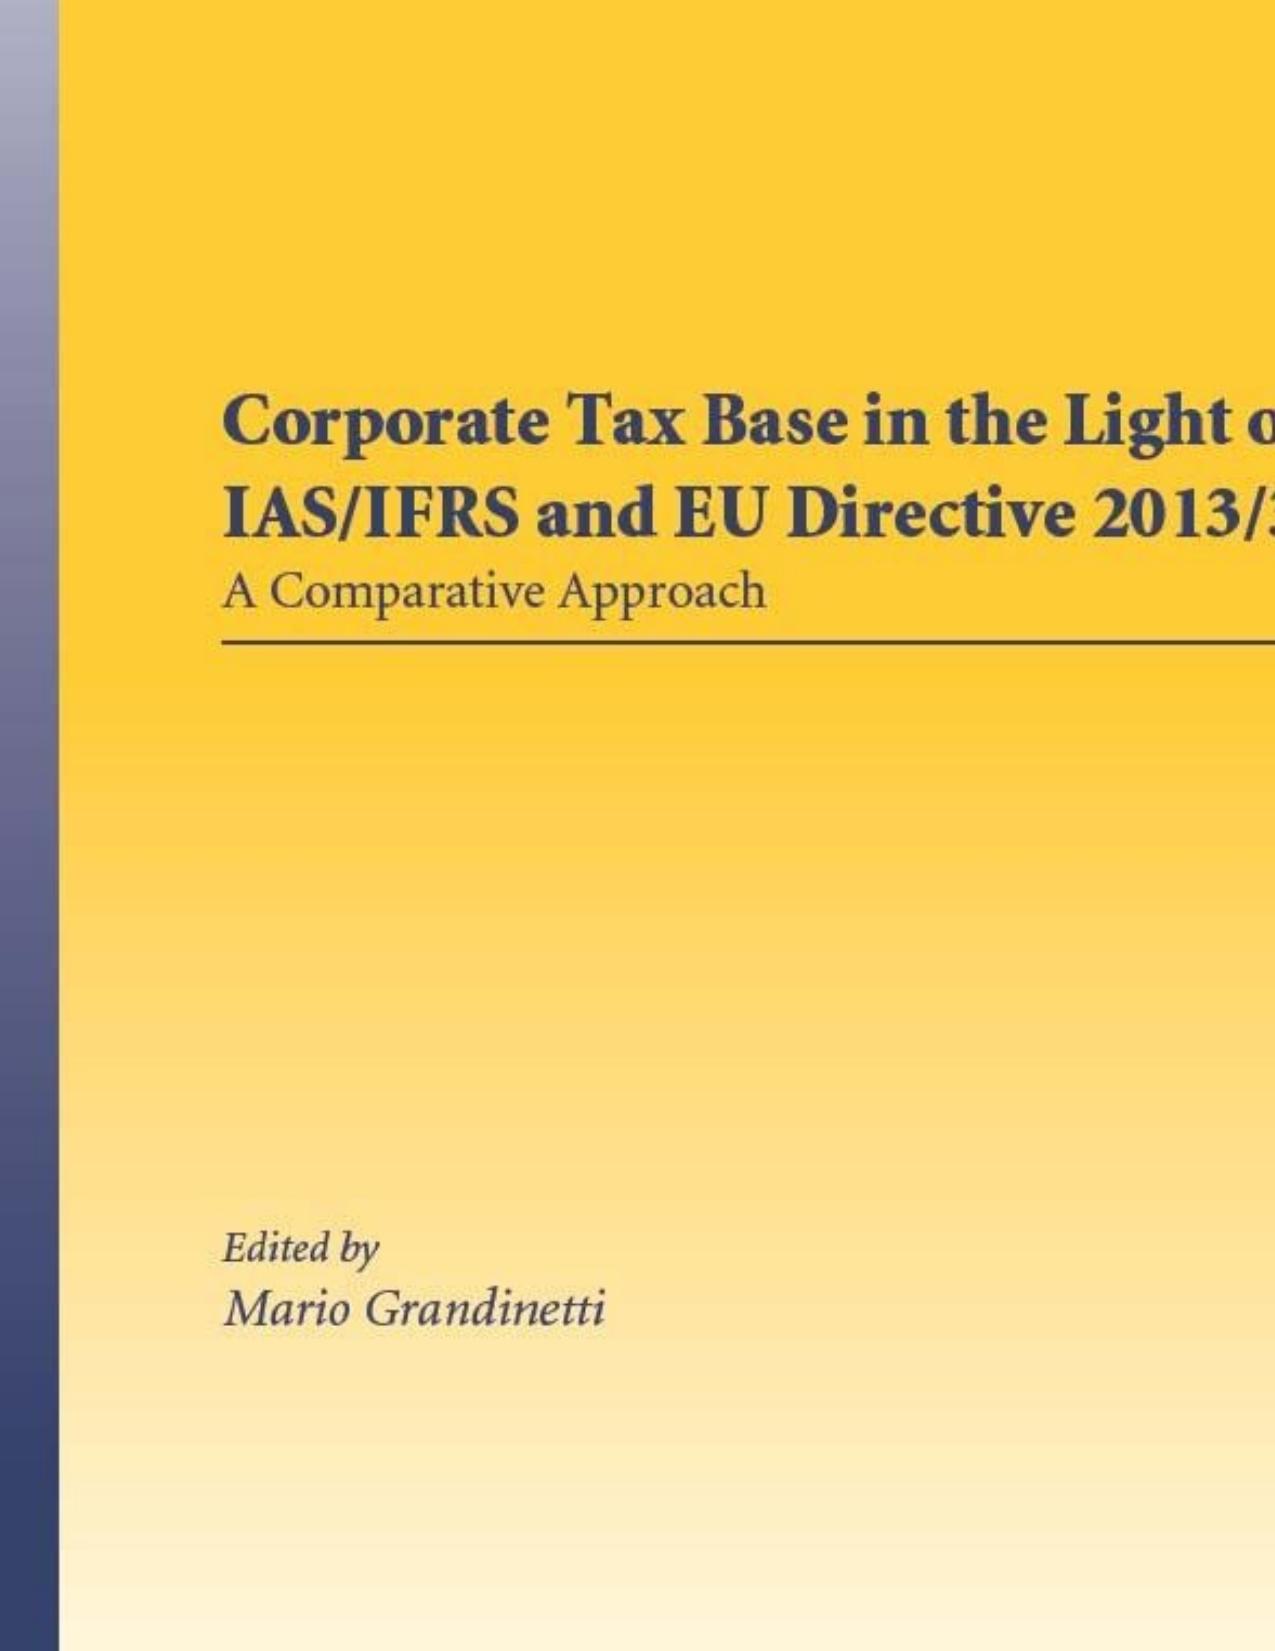 (eBook PDF)Corporate Tax Base in the Light of the IAS/IFRS and EU Directive 2013/34 by Mario Grandinetti